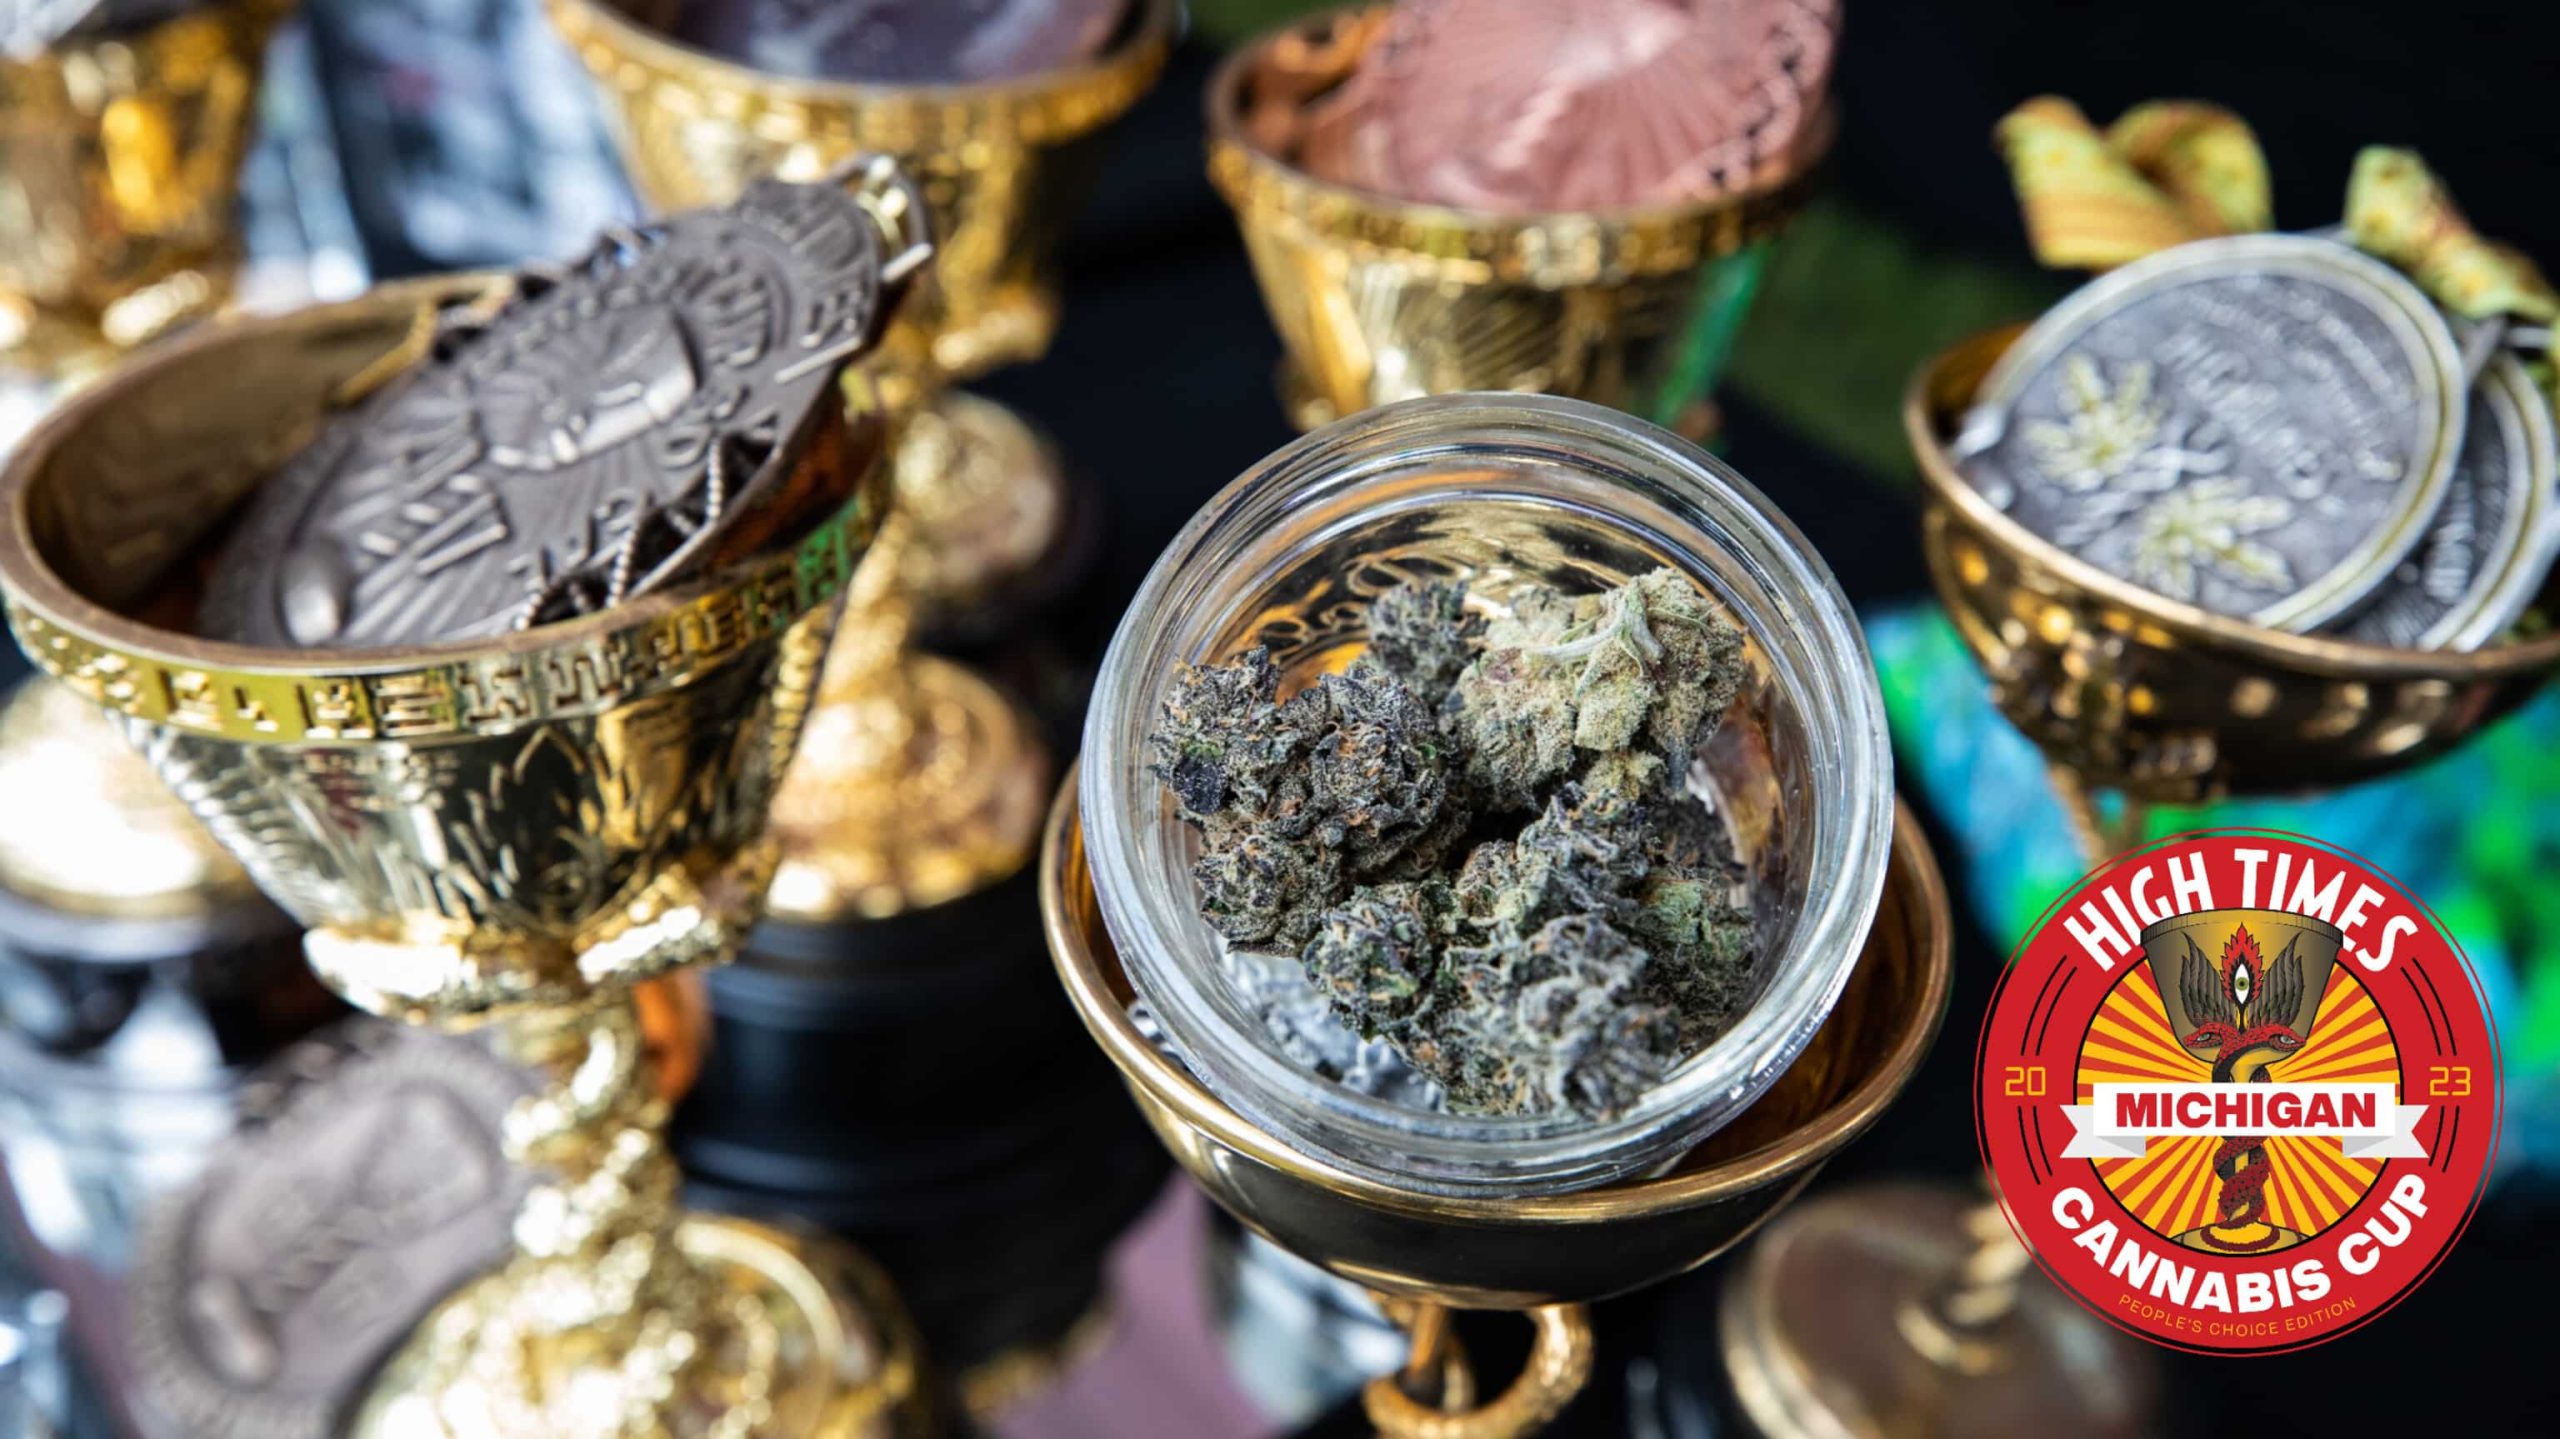 Announcing the Winners of the High Times Cannabis Cup Michigan: People’s Choice Edition 2023